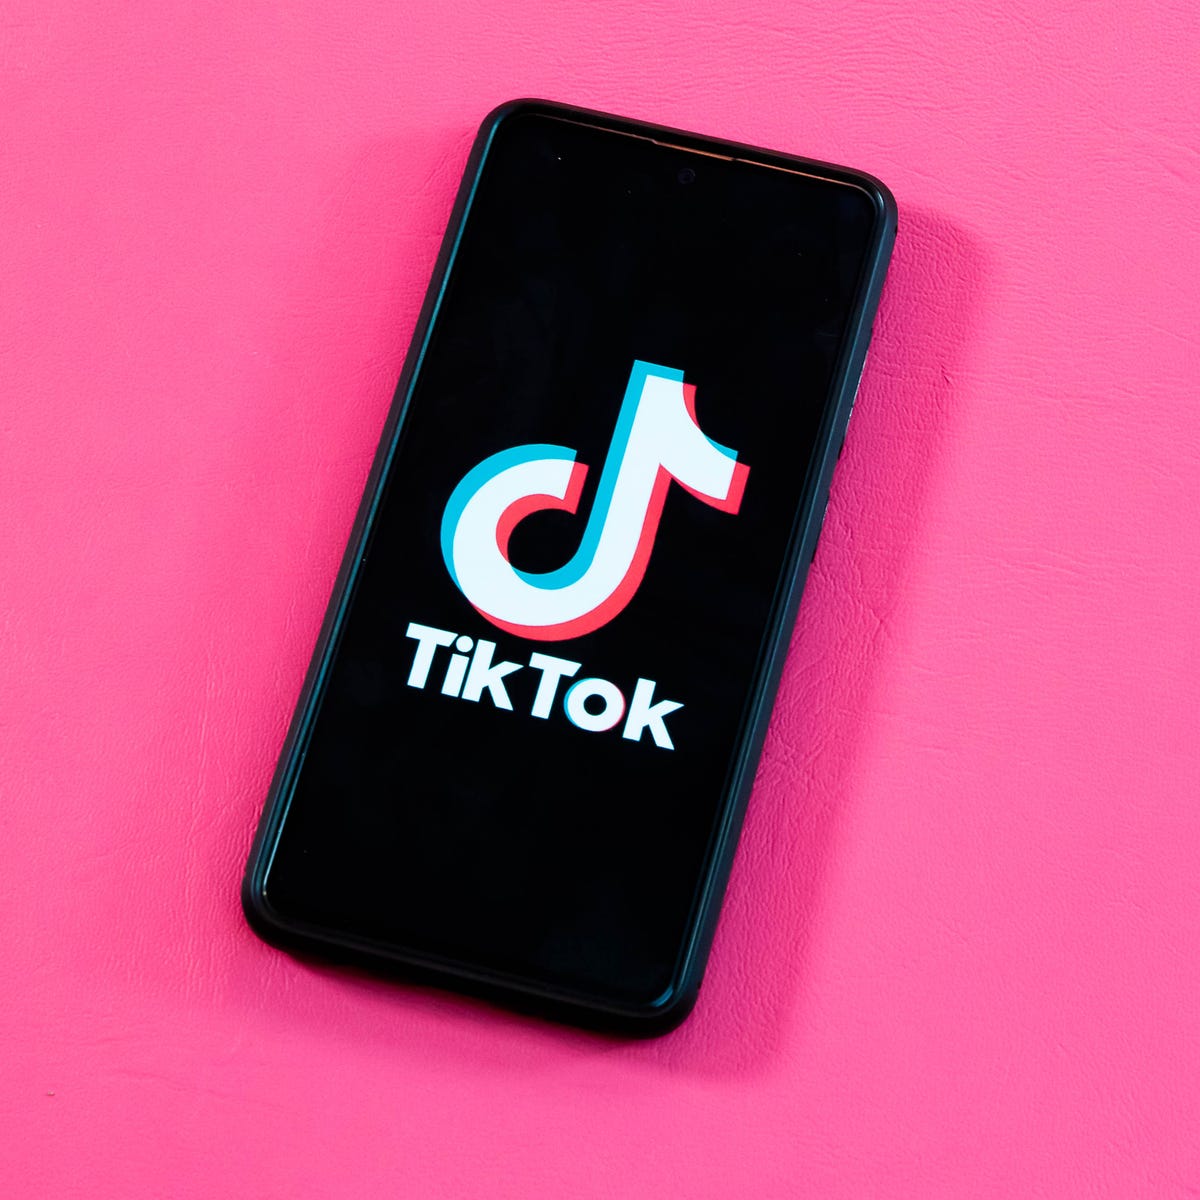 TikTok's In-App Browser Can Monitor Your Keystrokes, Researcher ...